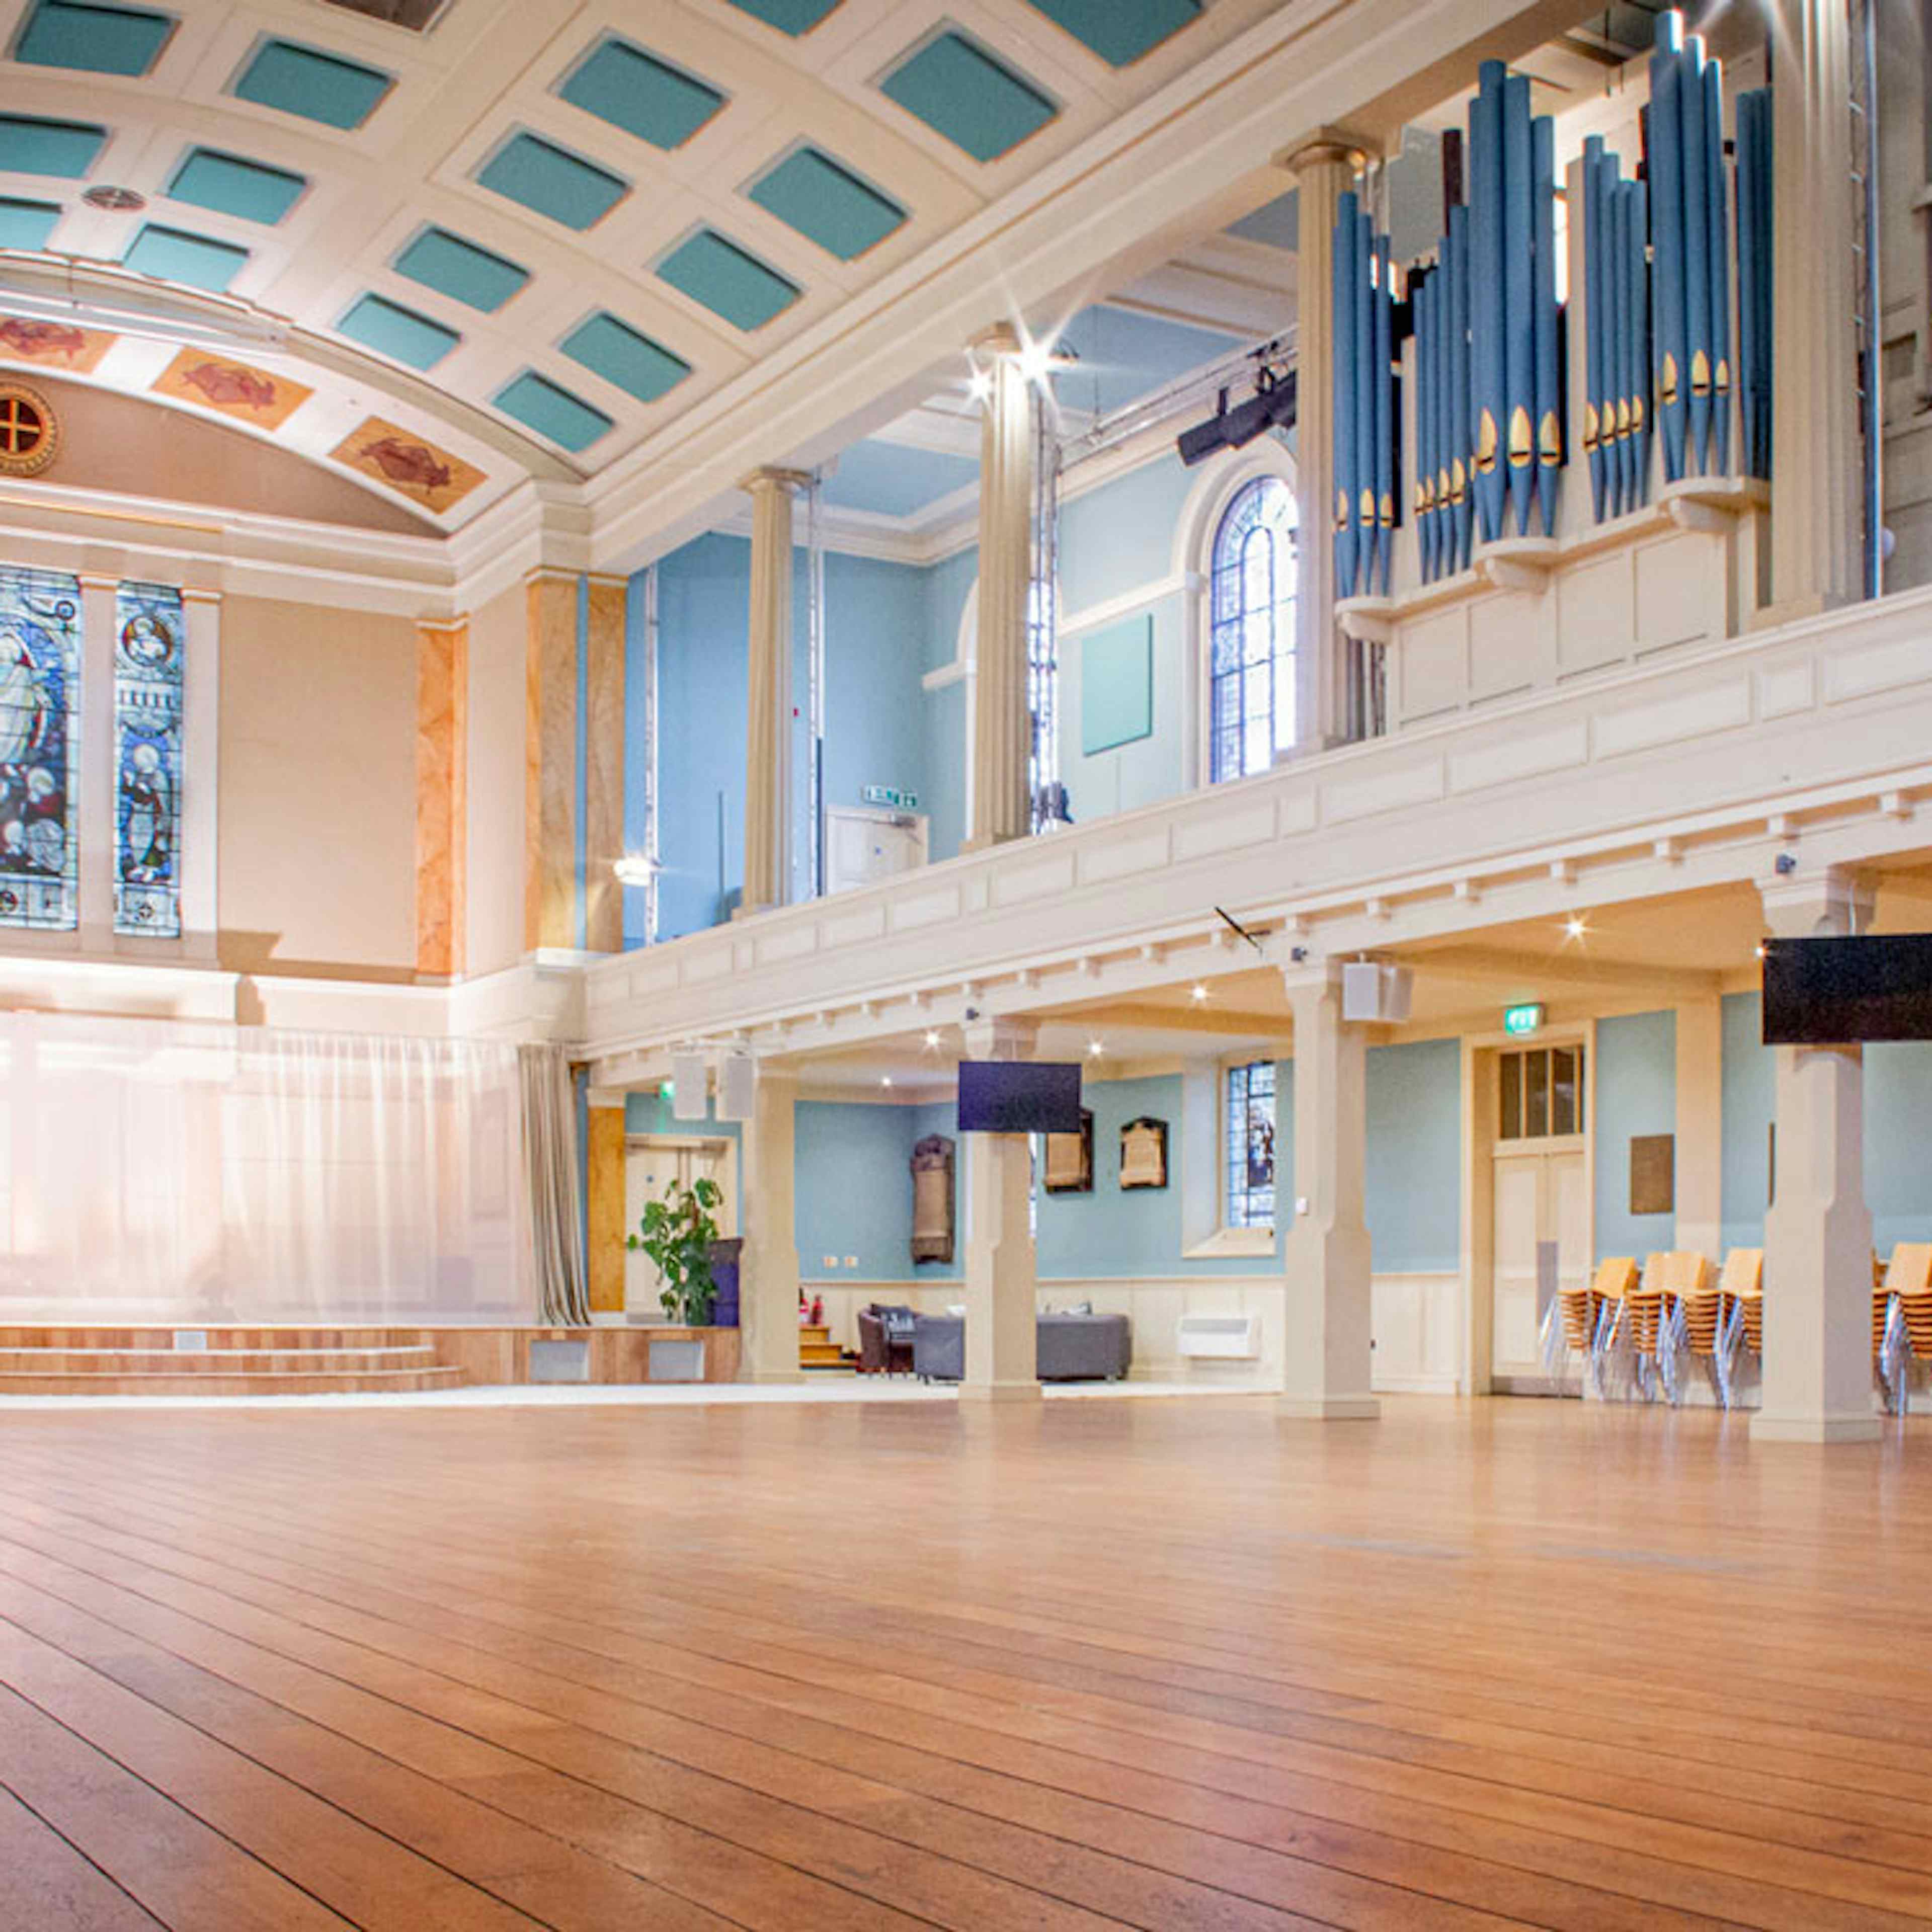 St Mary's Venue - The Great Hall image 3